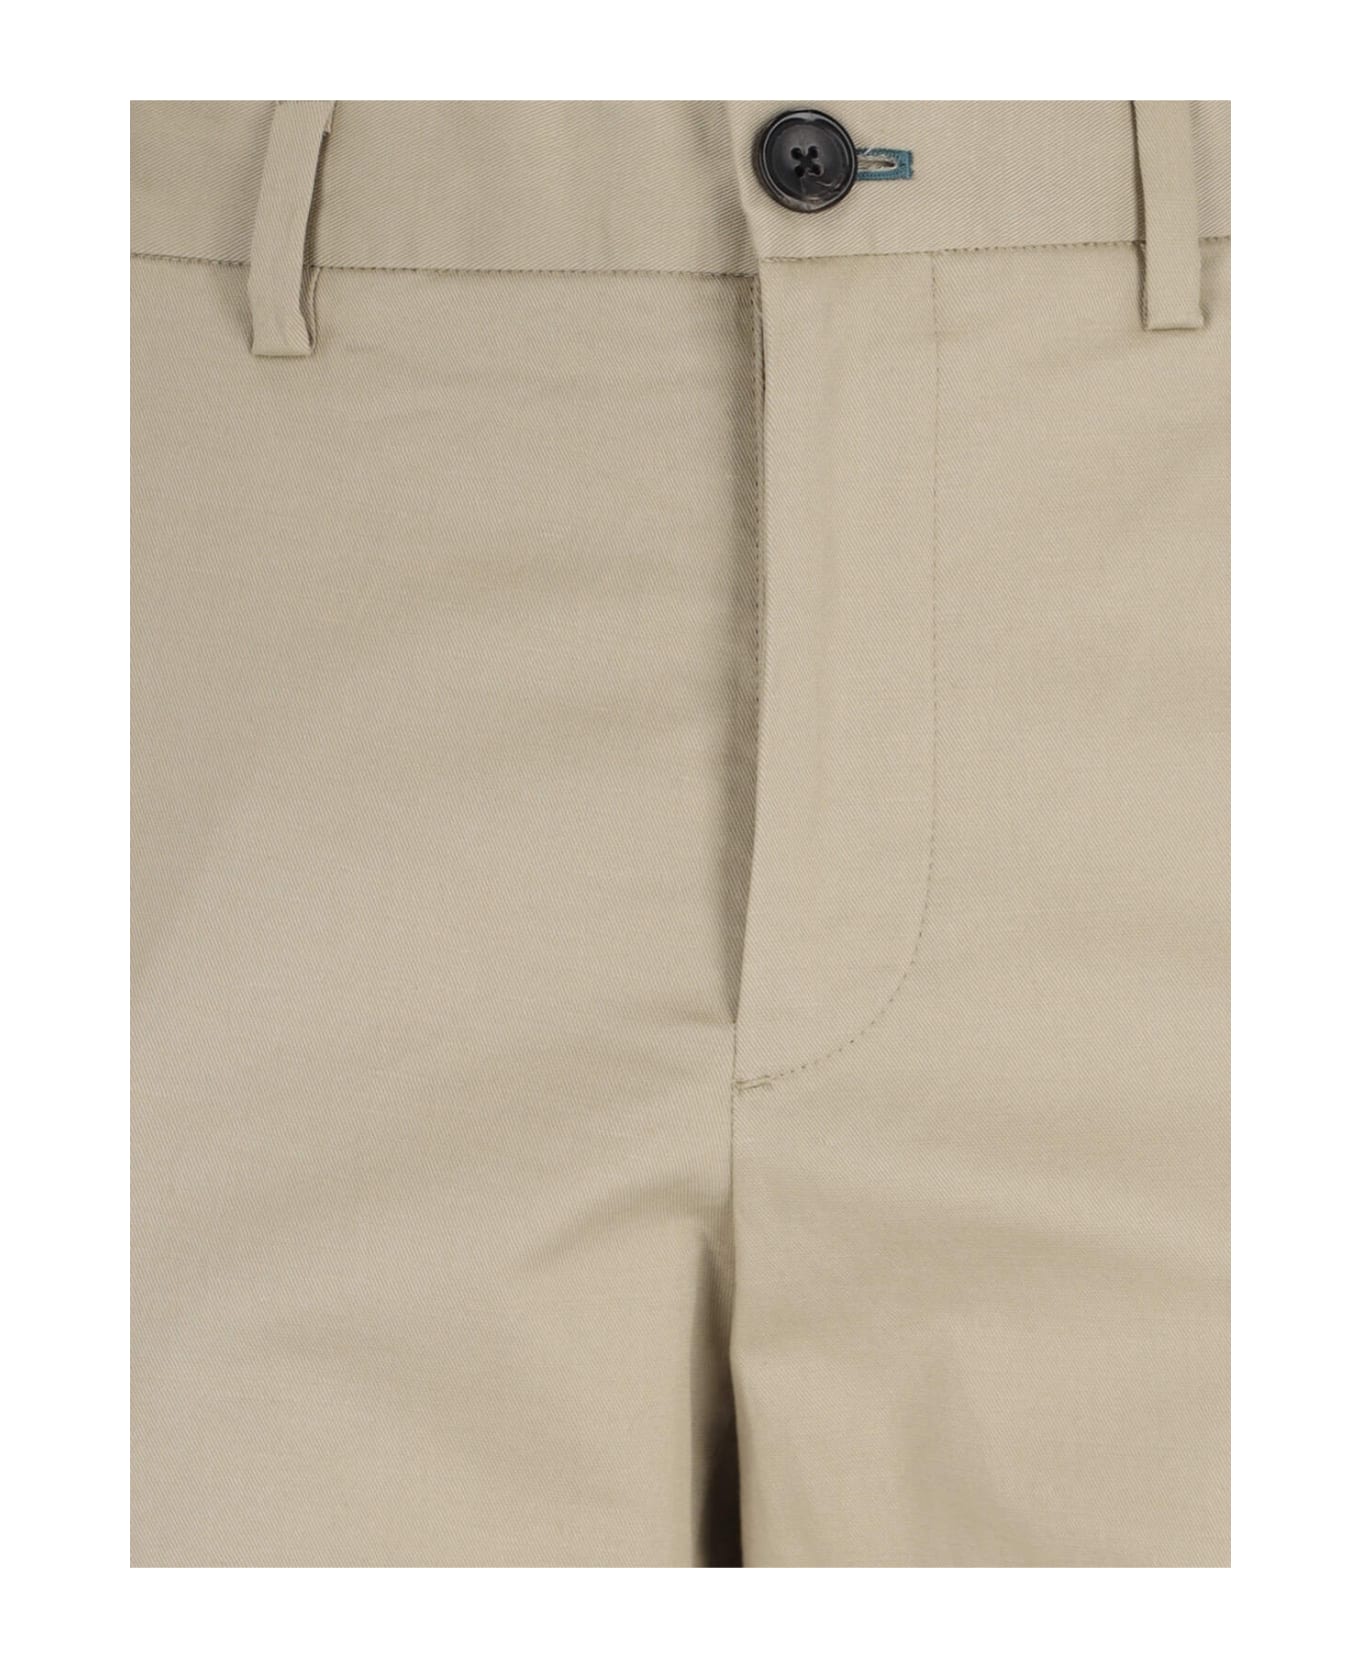 Paul Smith Chinos - Beige ボトムス